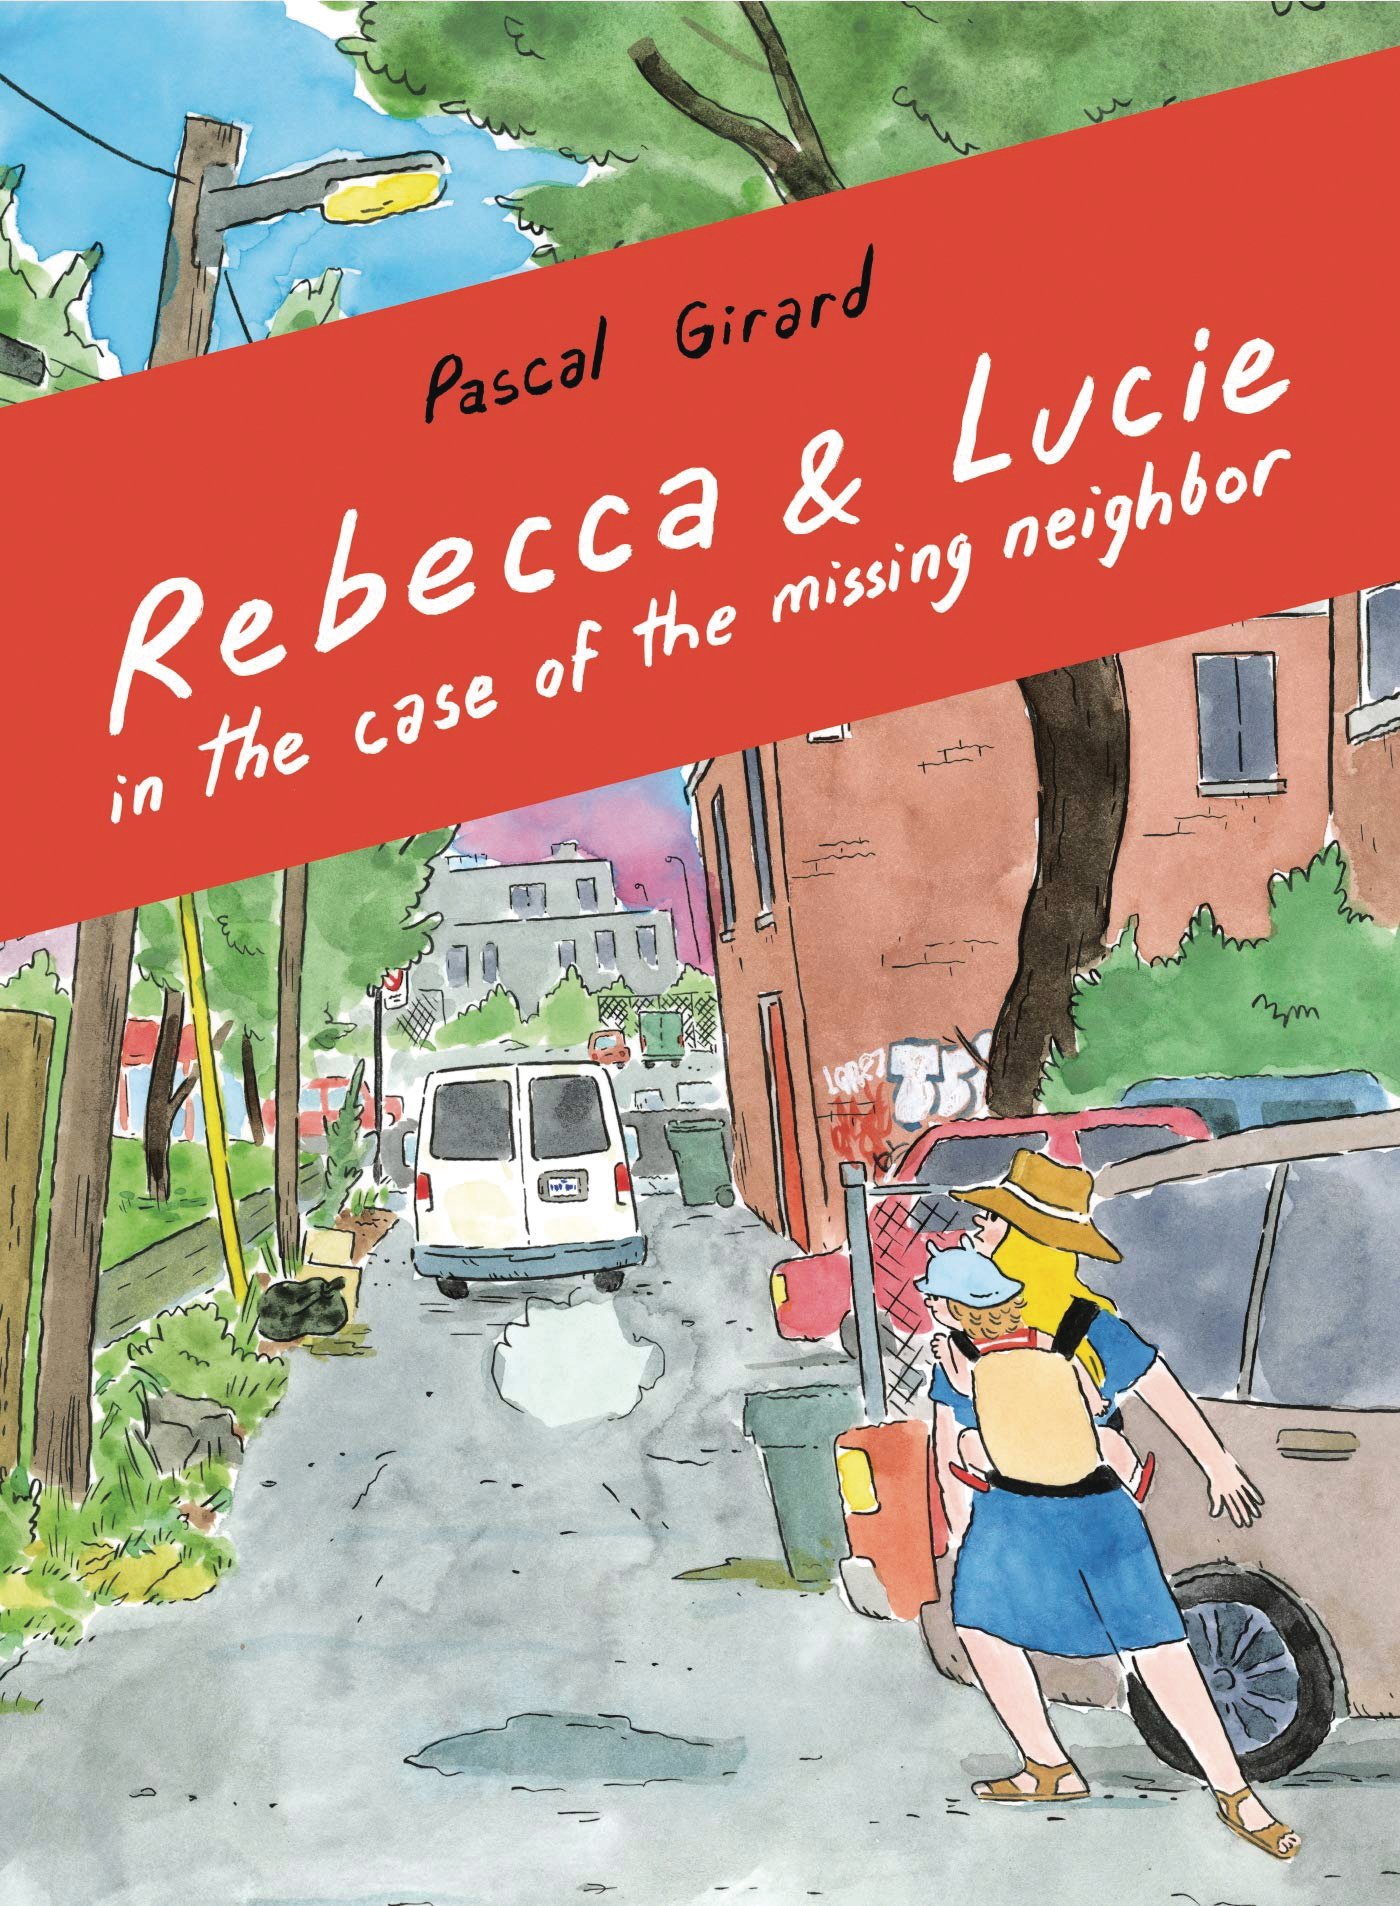 Rebecca And Lucie Soft Cover Graphic Novel